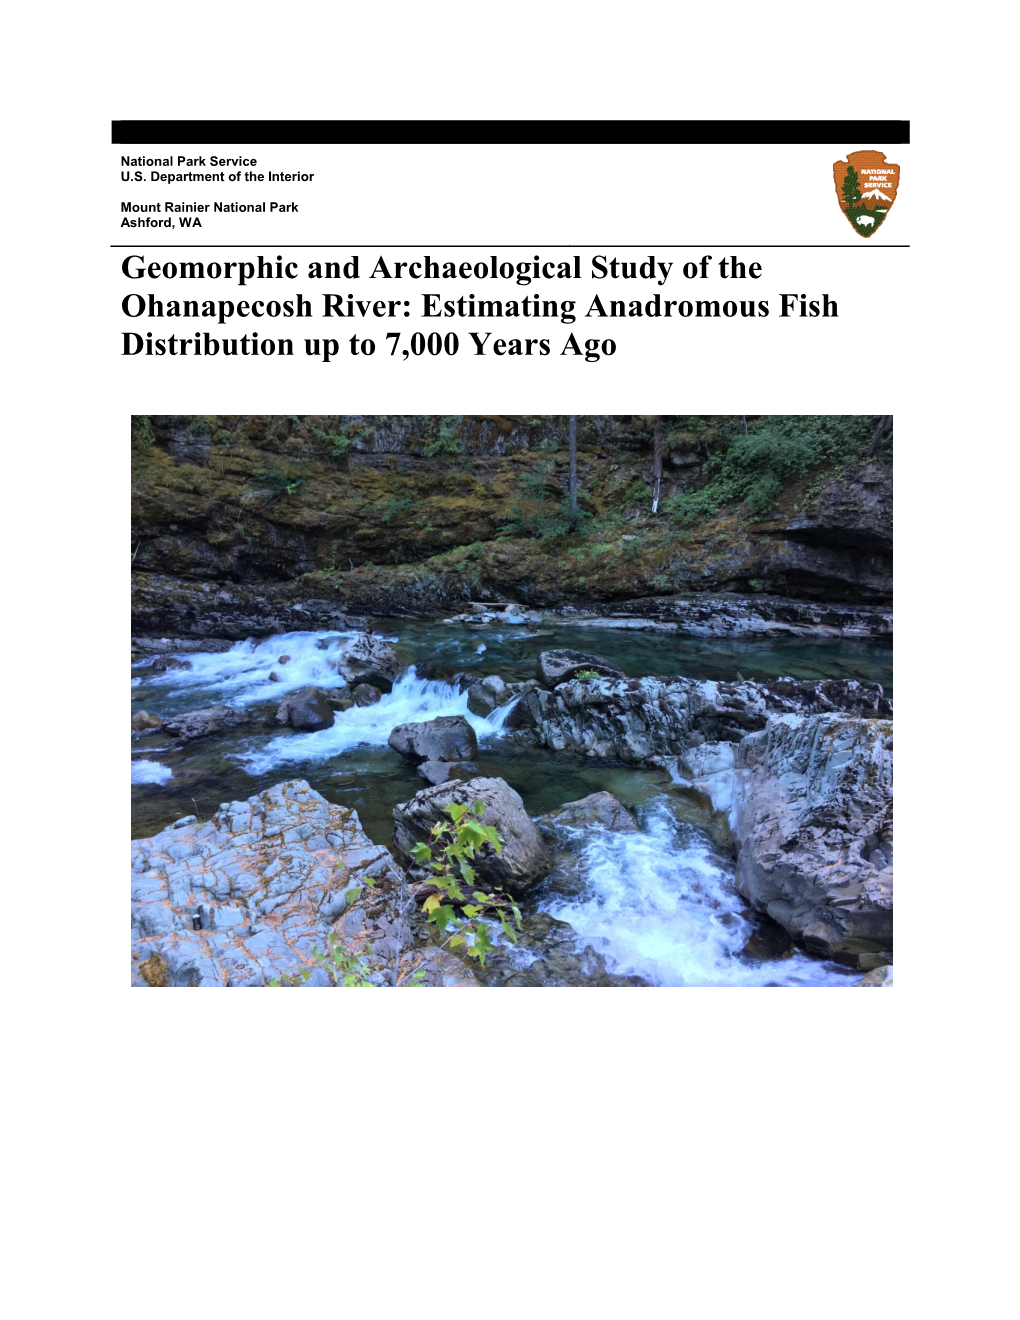 Geomorphic and Archaeological Study of the Ohanapecosh River: Estimating Anadromous Fish Distribution up to 7,000 Years Ago